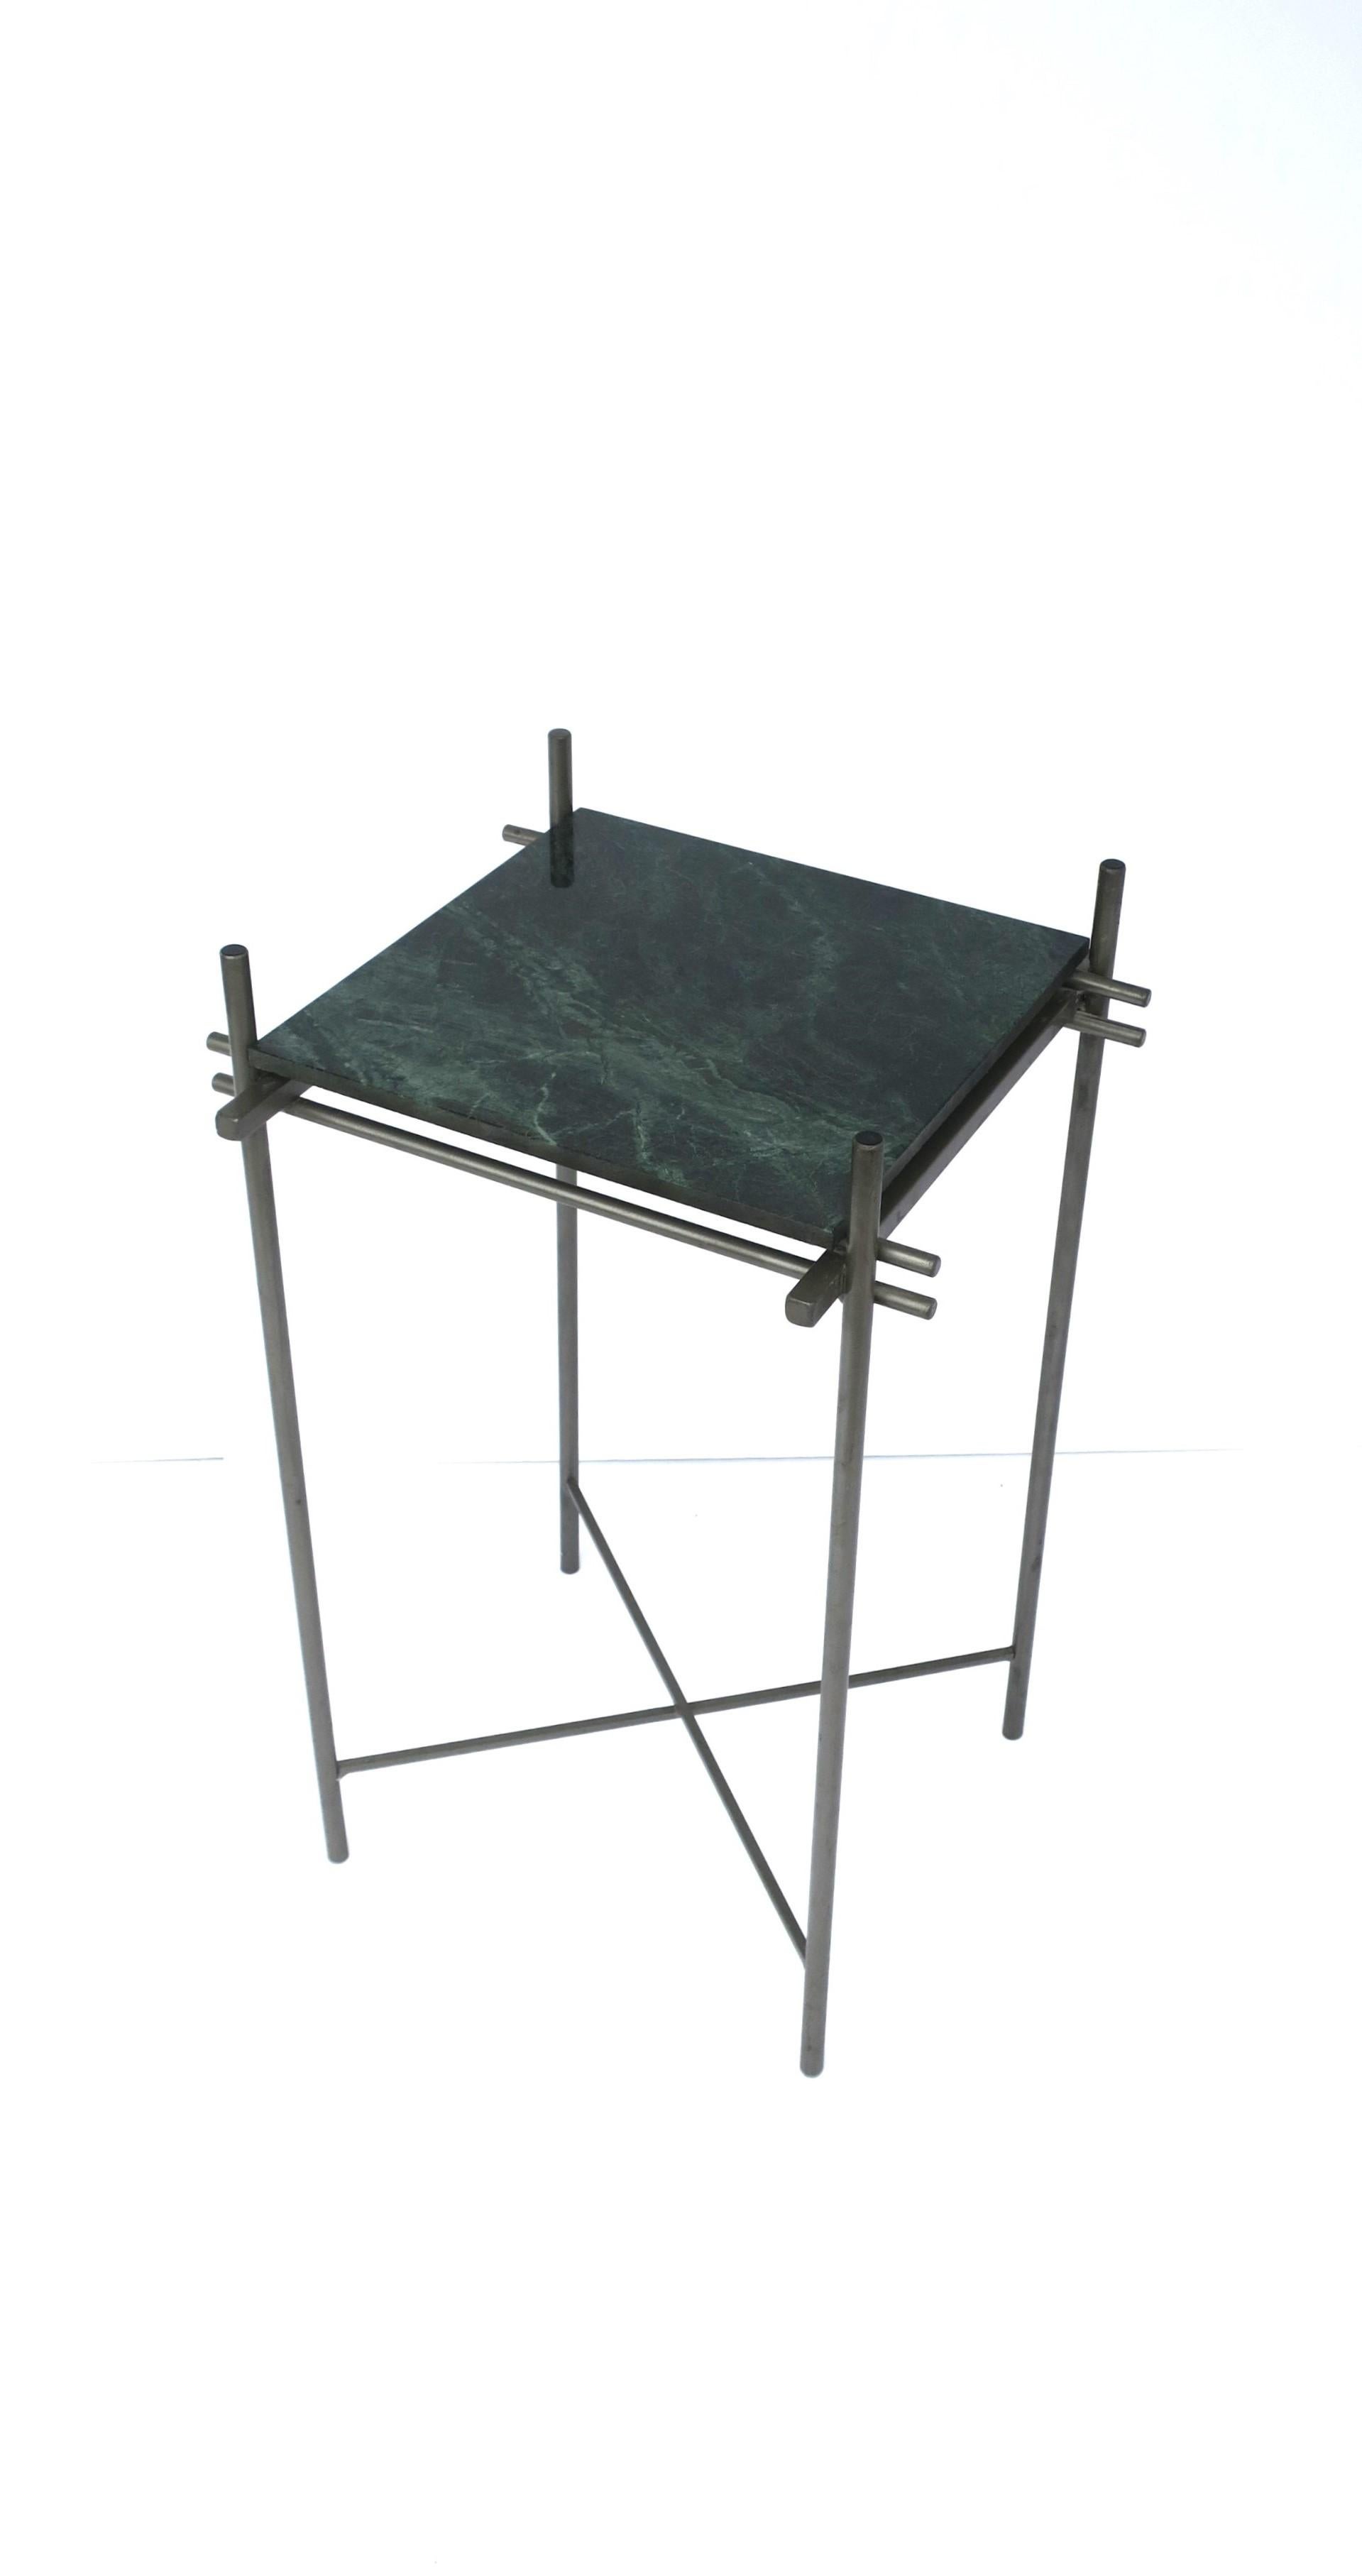 An Italian Postmodern side drinks table with a grey gun-metal frame and dark green marble top, circa 1990s, Italy. A great table for drinks/cocktails in a convenient size. Very good condition as shown in images and video. Parcel shipping available.